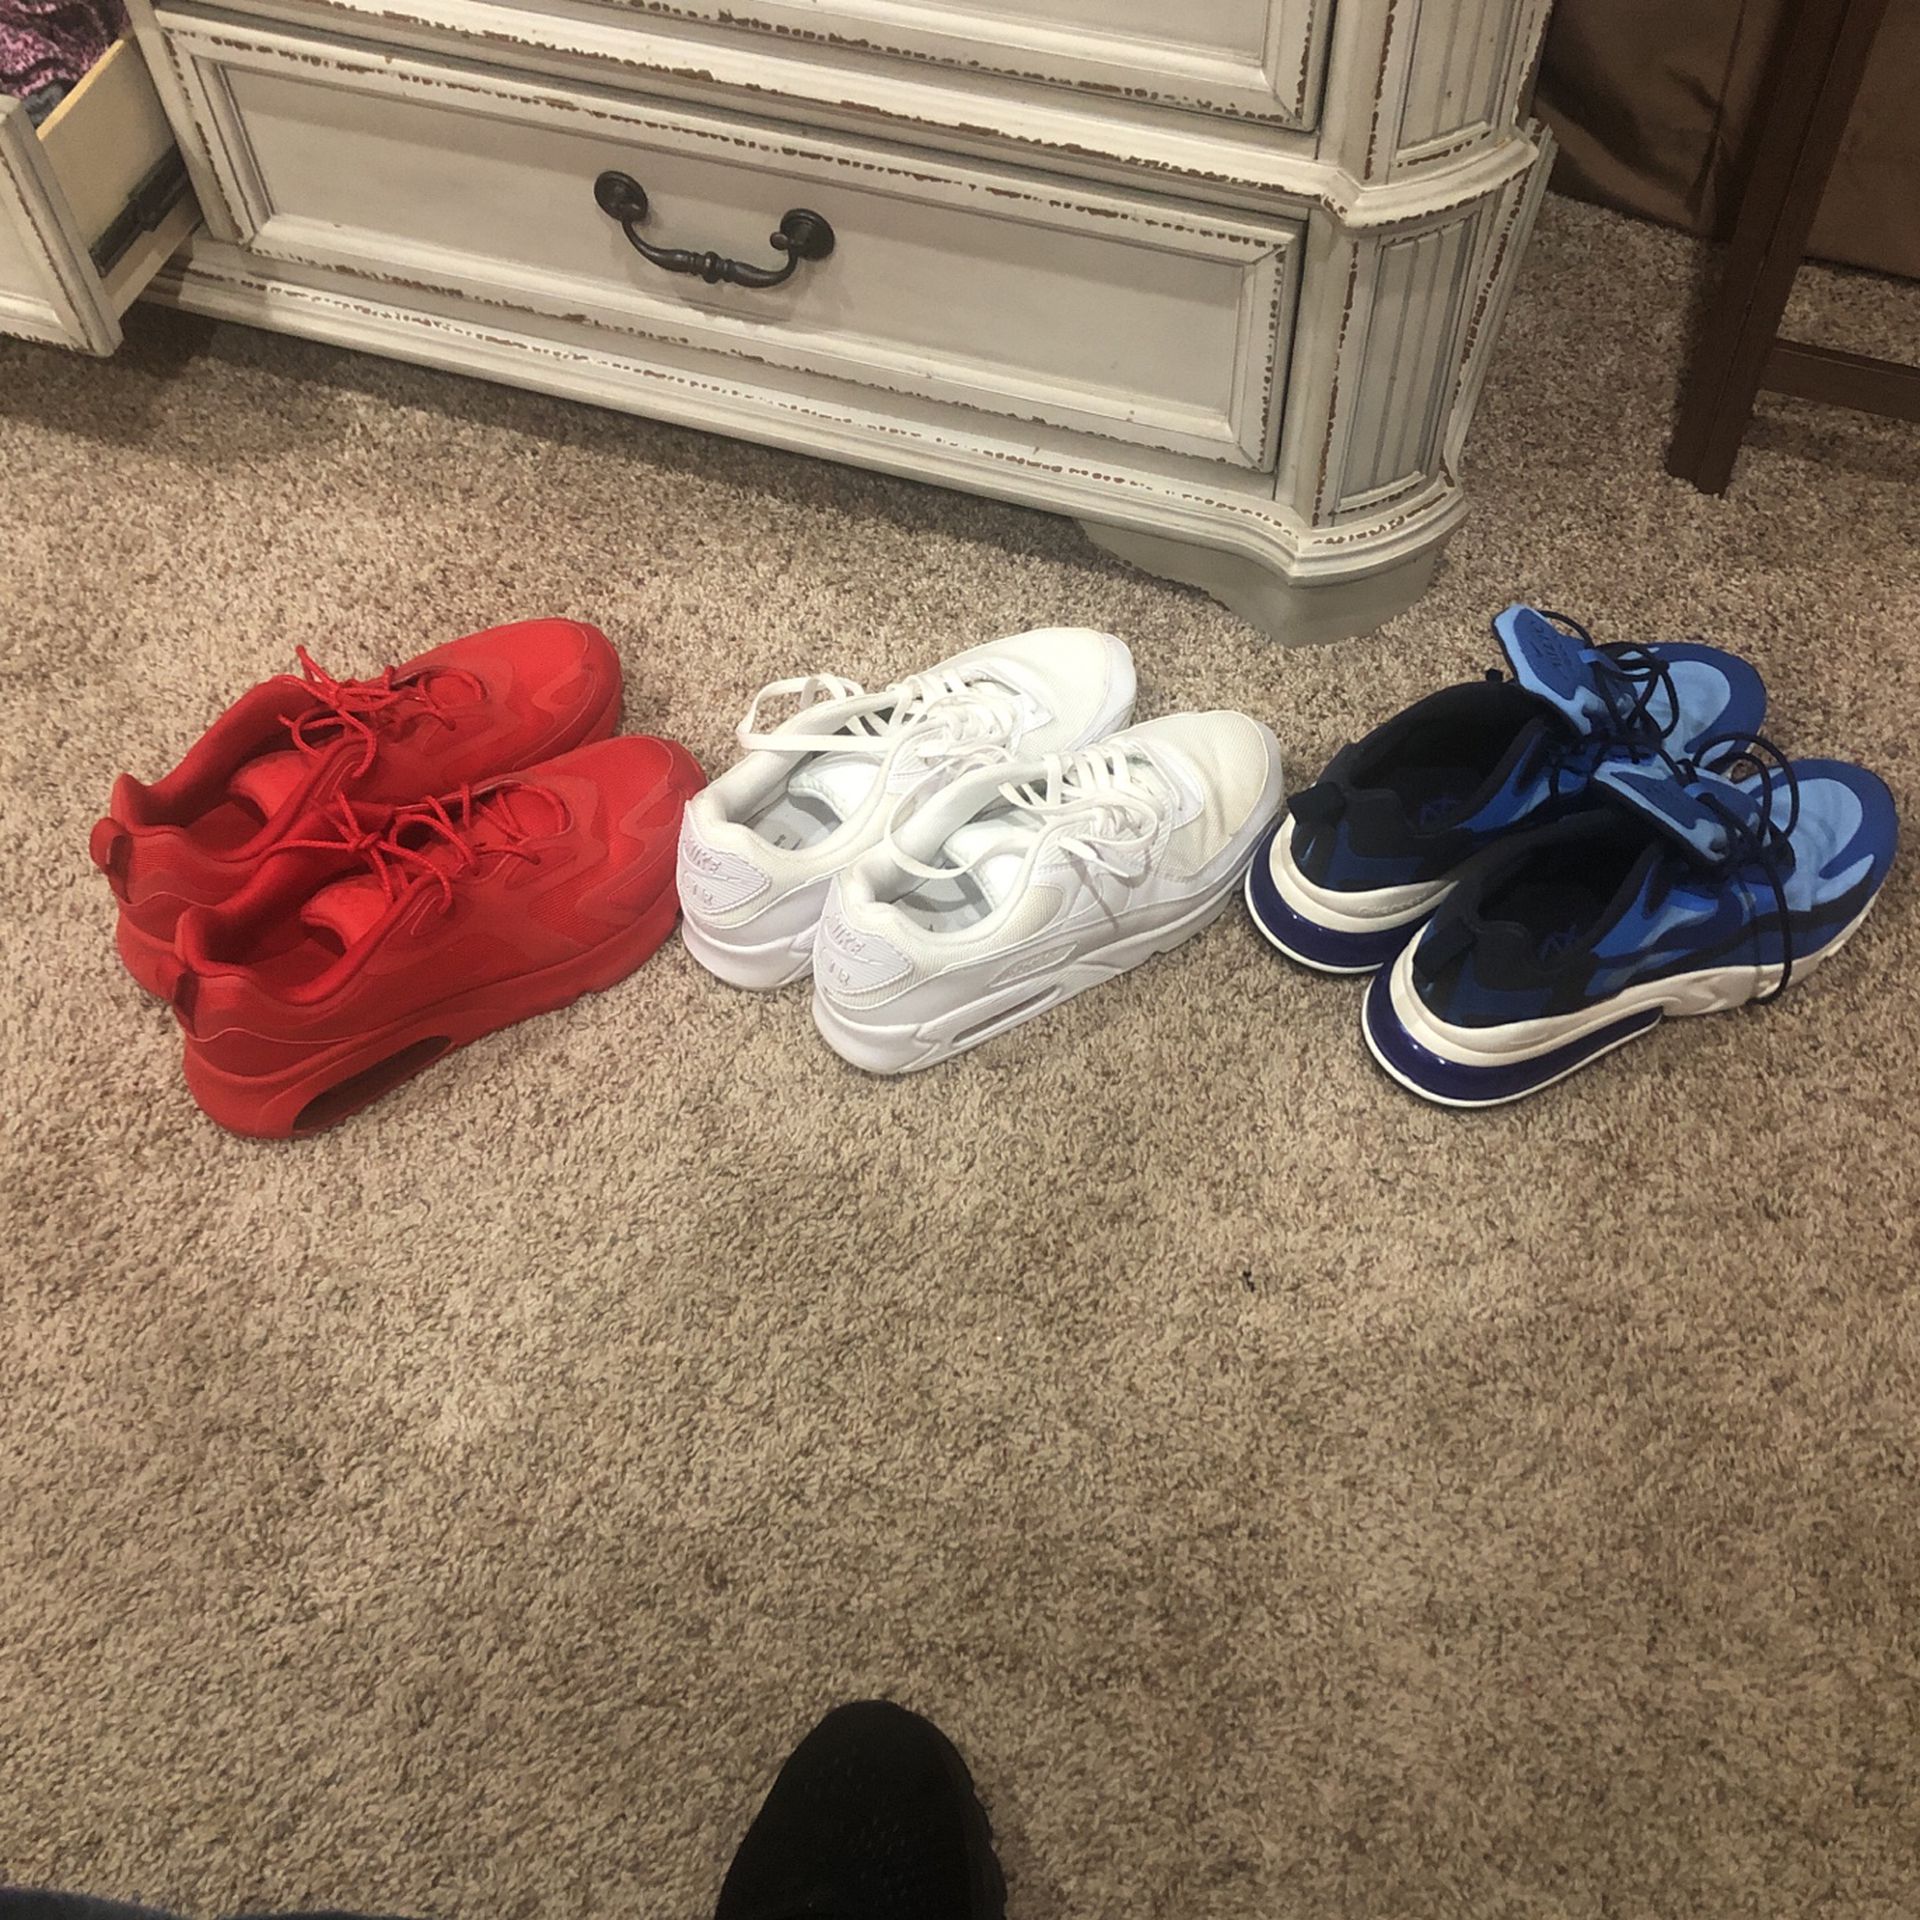 Nike’s Size 12 Each Pair $20 A Piece Are $40.00For All 3 Pair